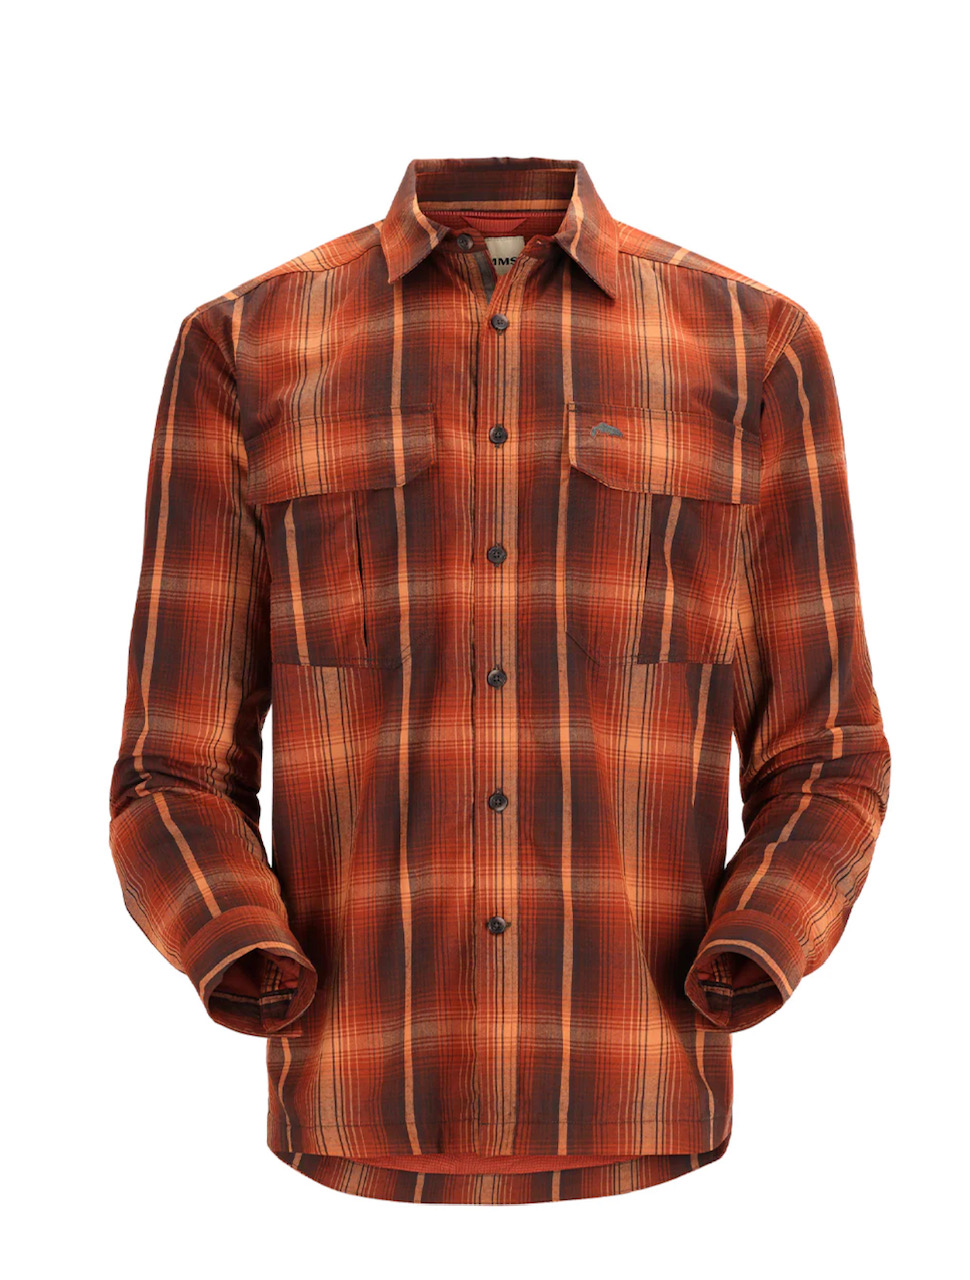 Simms M's Coldweather L/S Shirt - Hickory Clay - Large